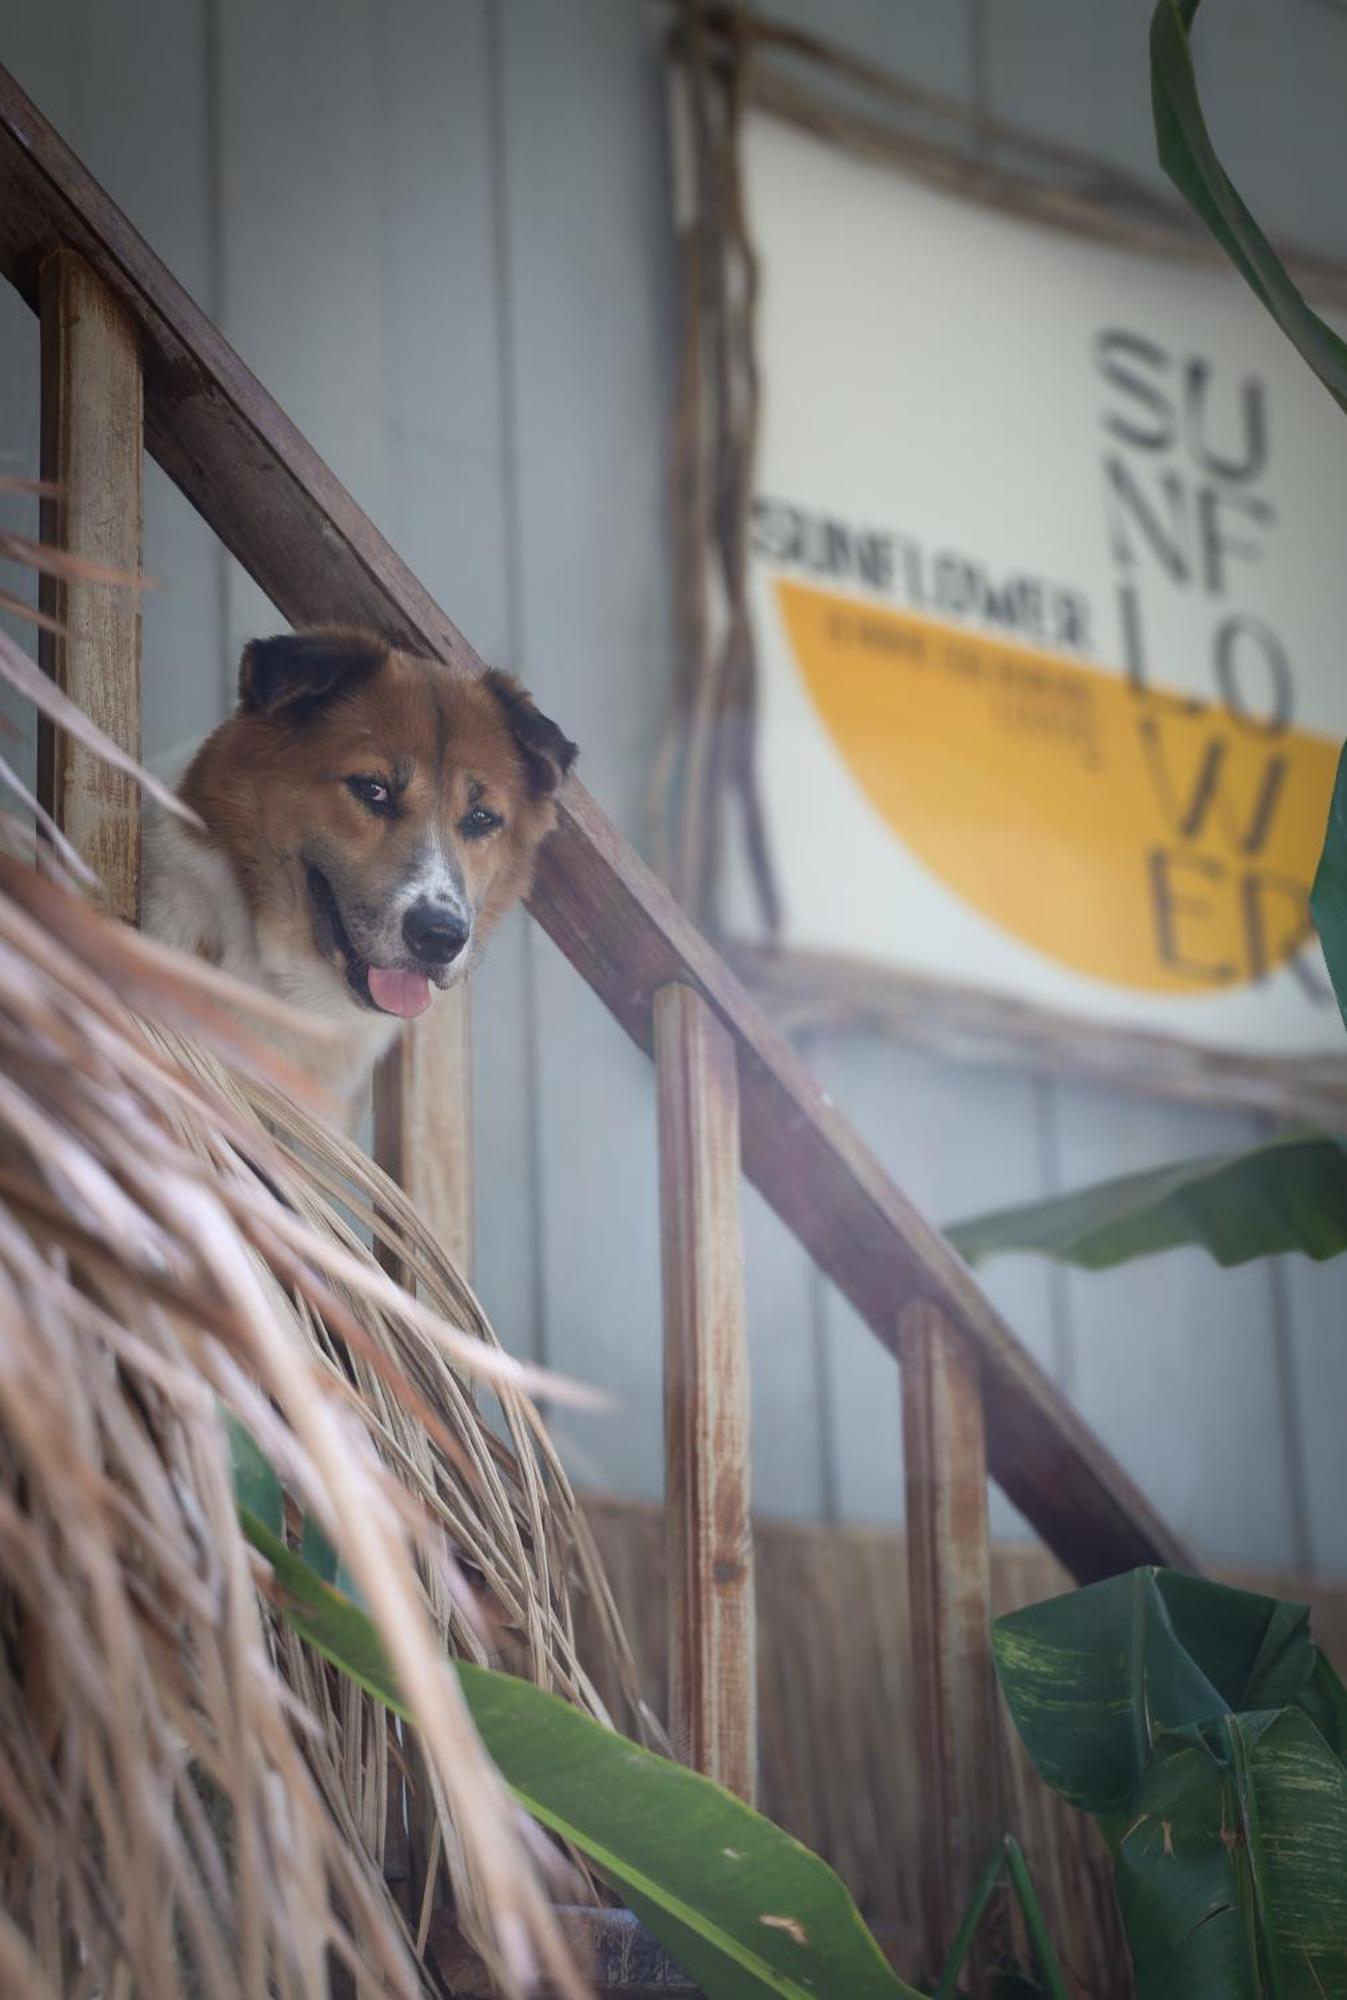 Sunflower Guesthouse And Animal Rescue - Koh Lipe Bagian luar foto